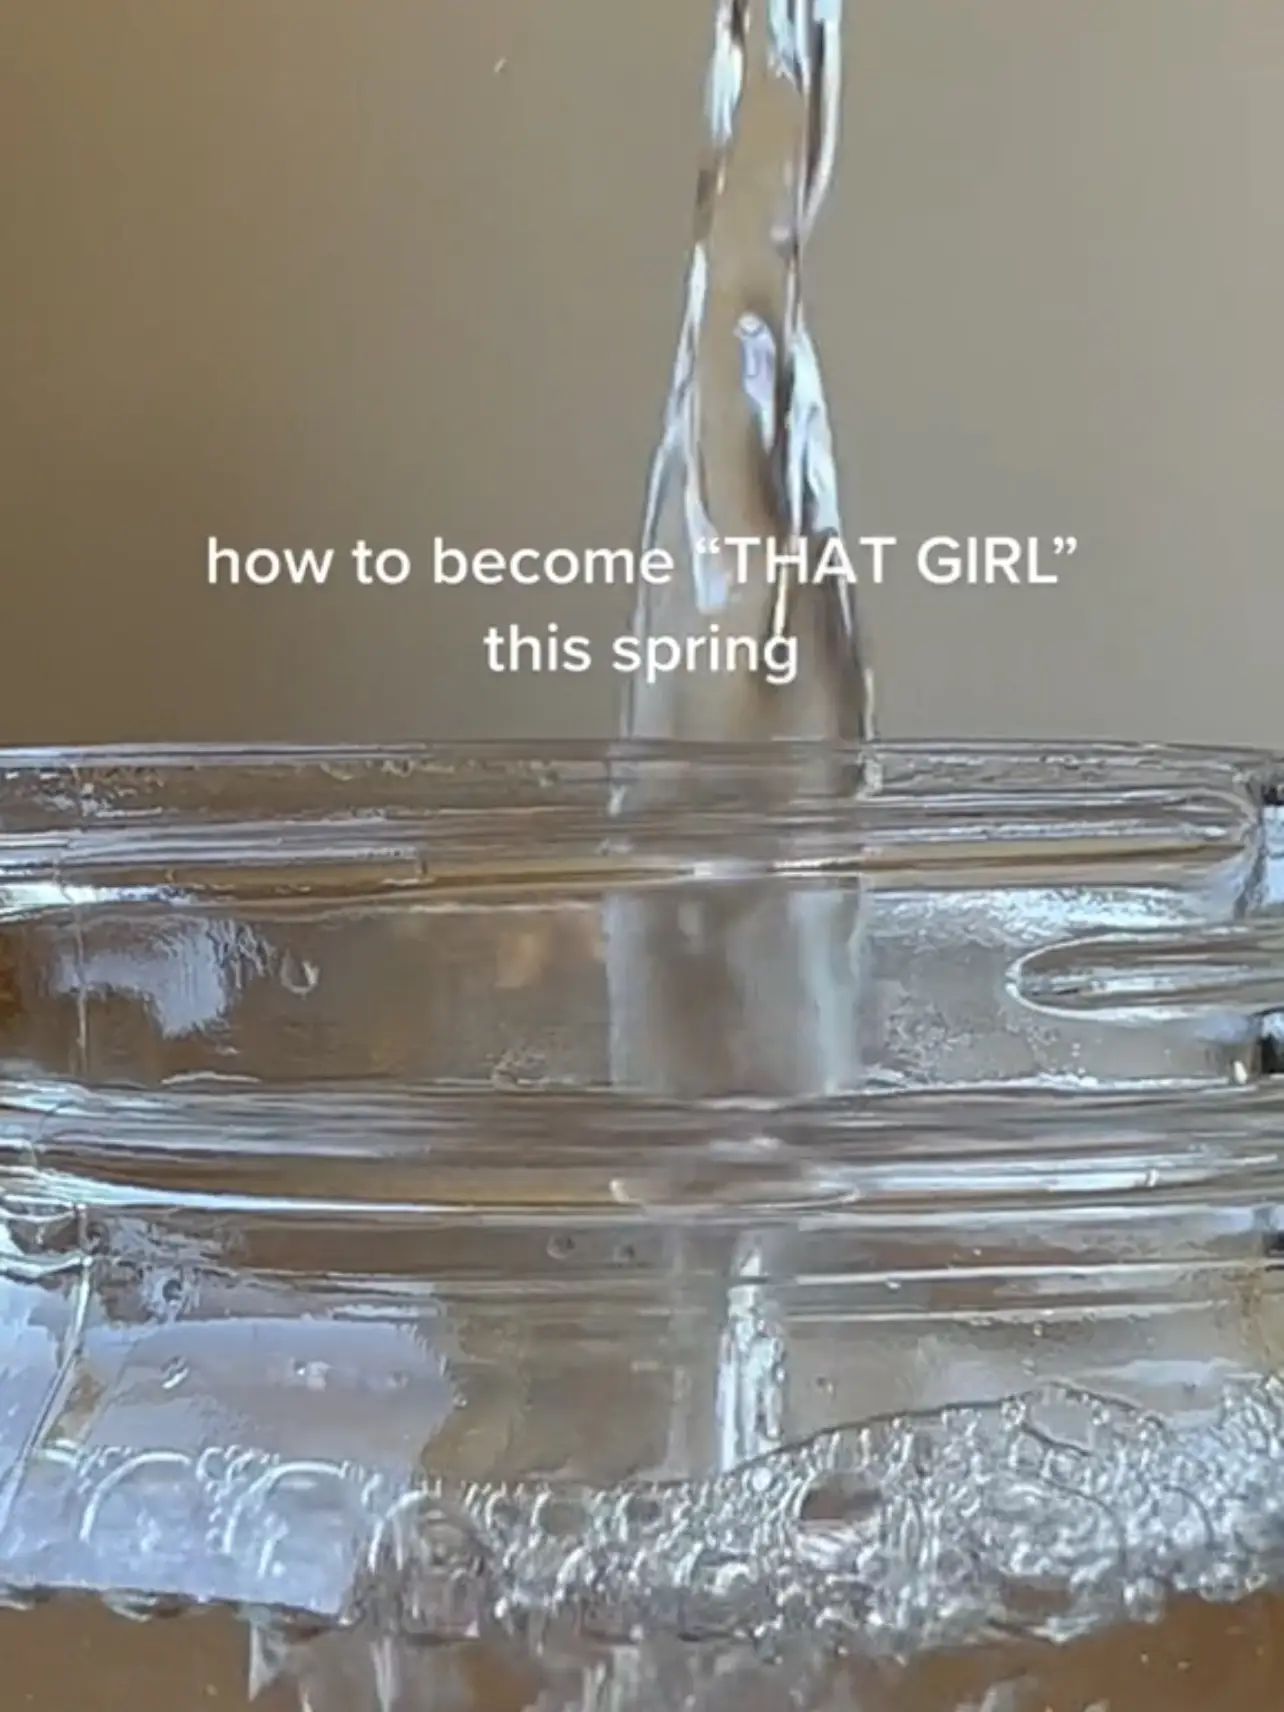 How to become “That Girl” this spring!!'s images